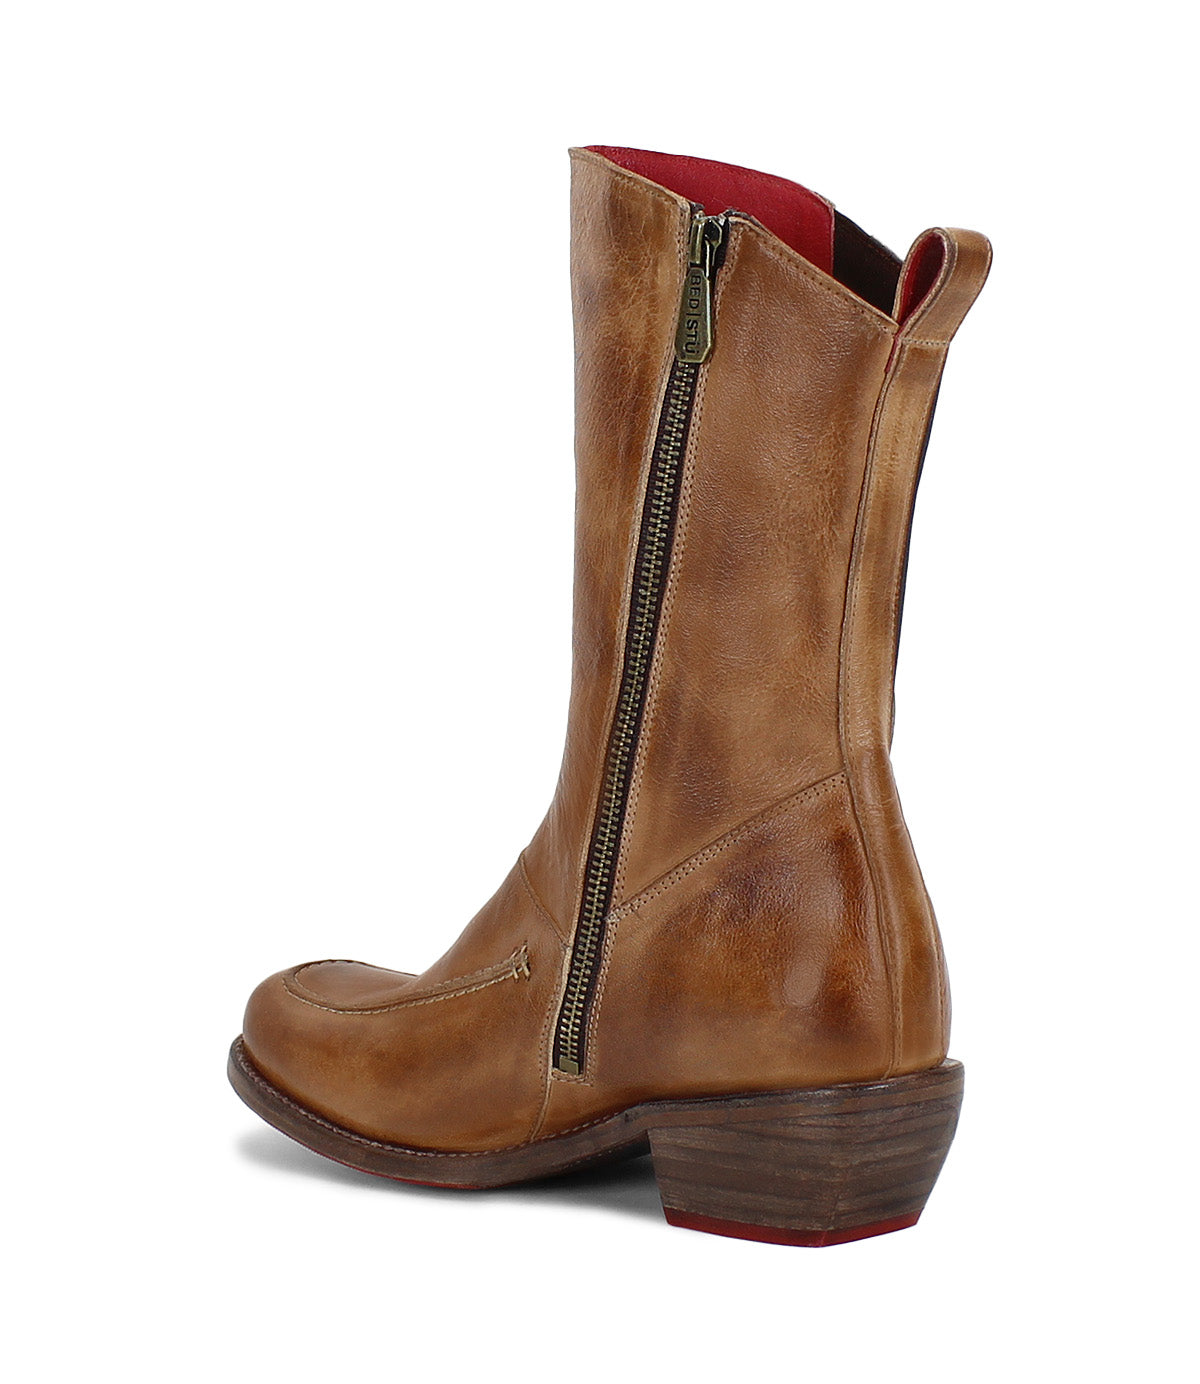 Nivi: A women's tan leather boot with a zipper on the side, by Bed Stu.